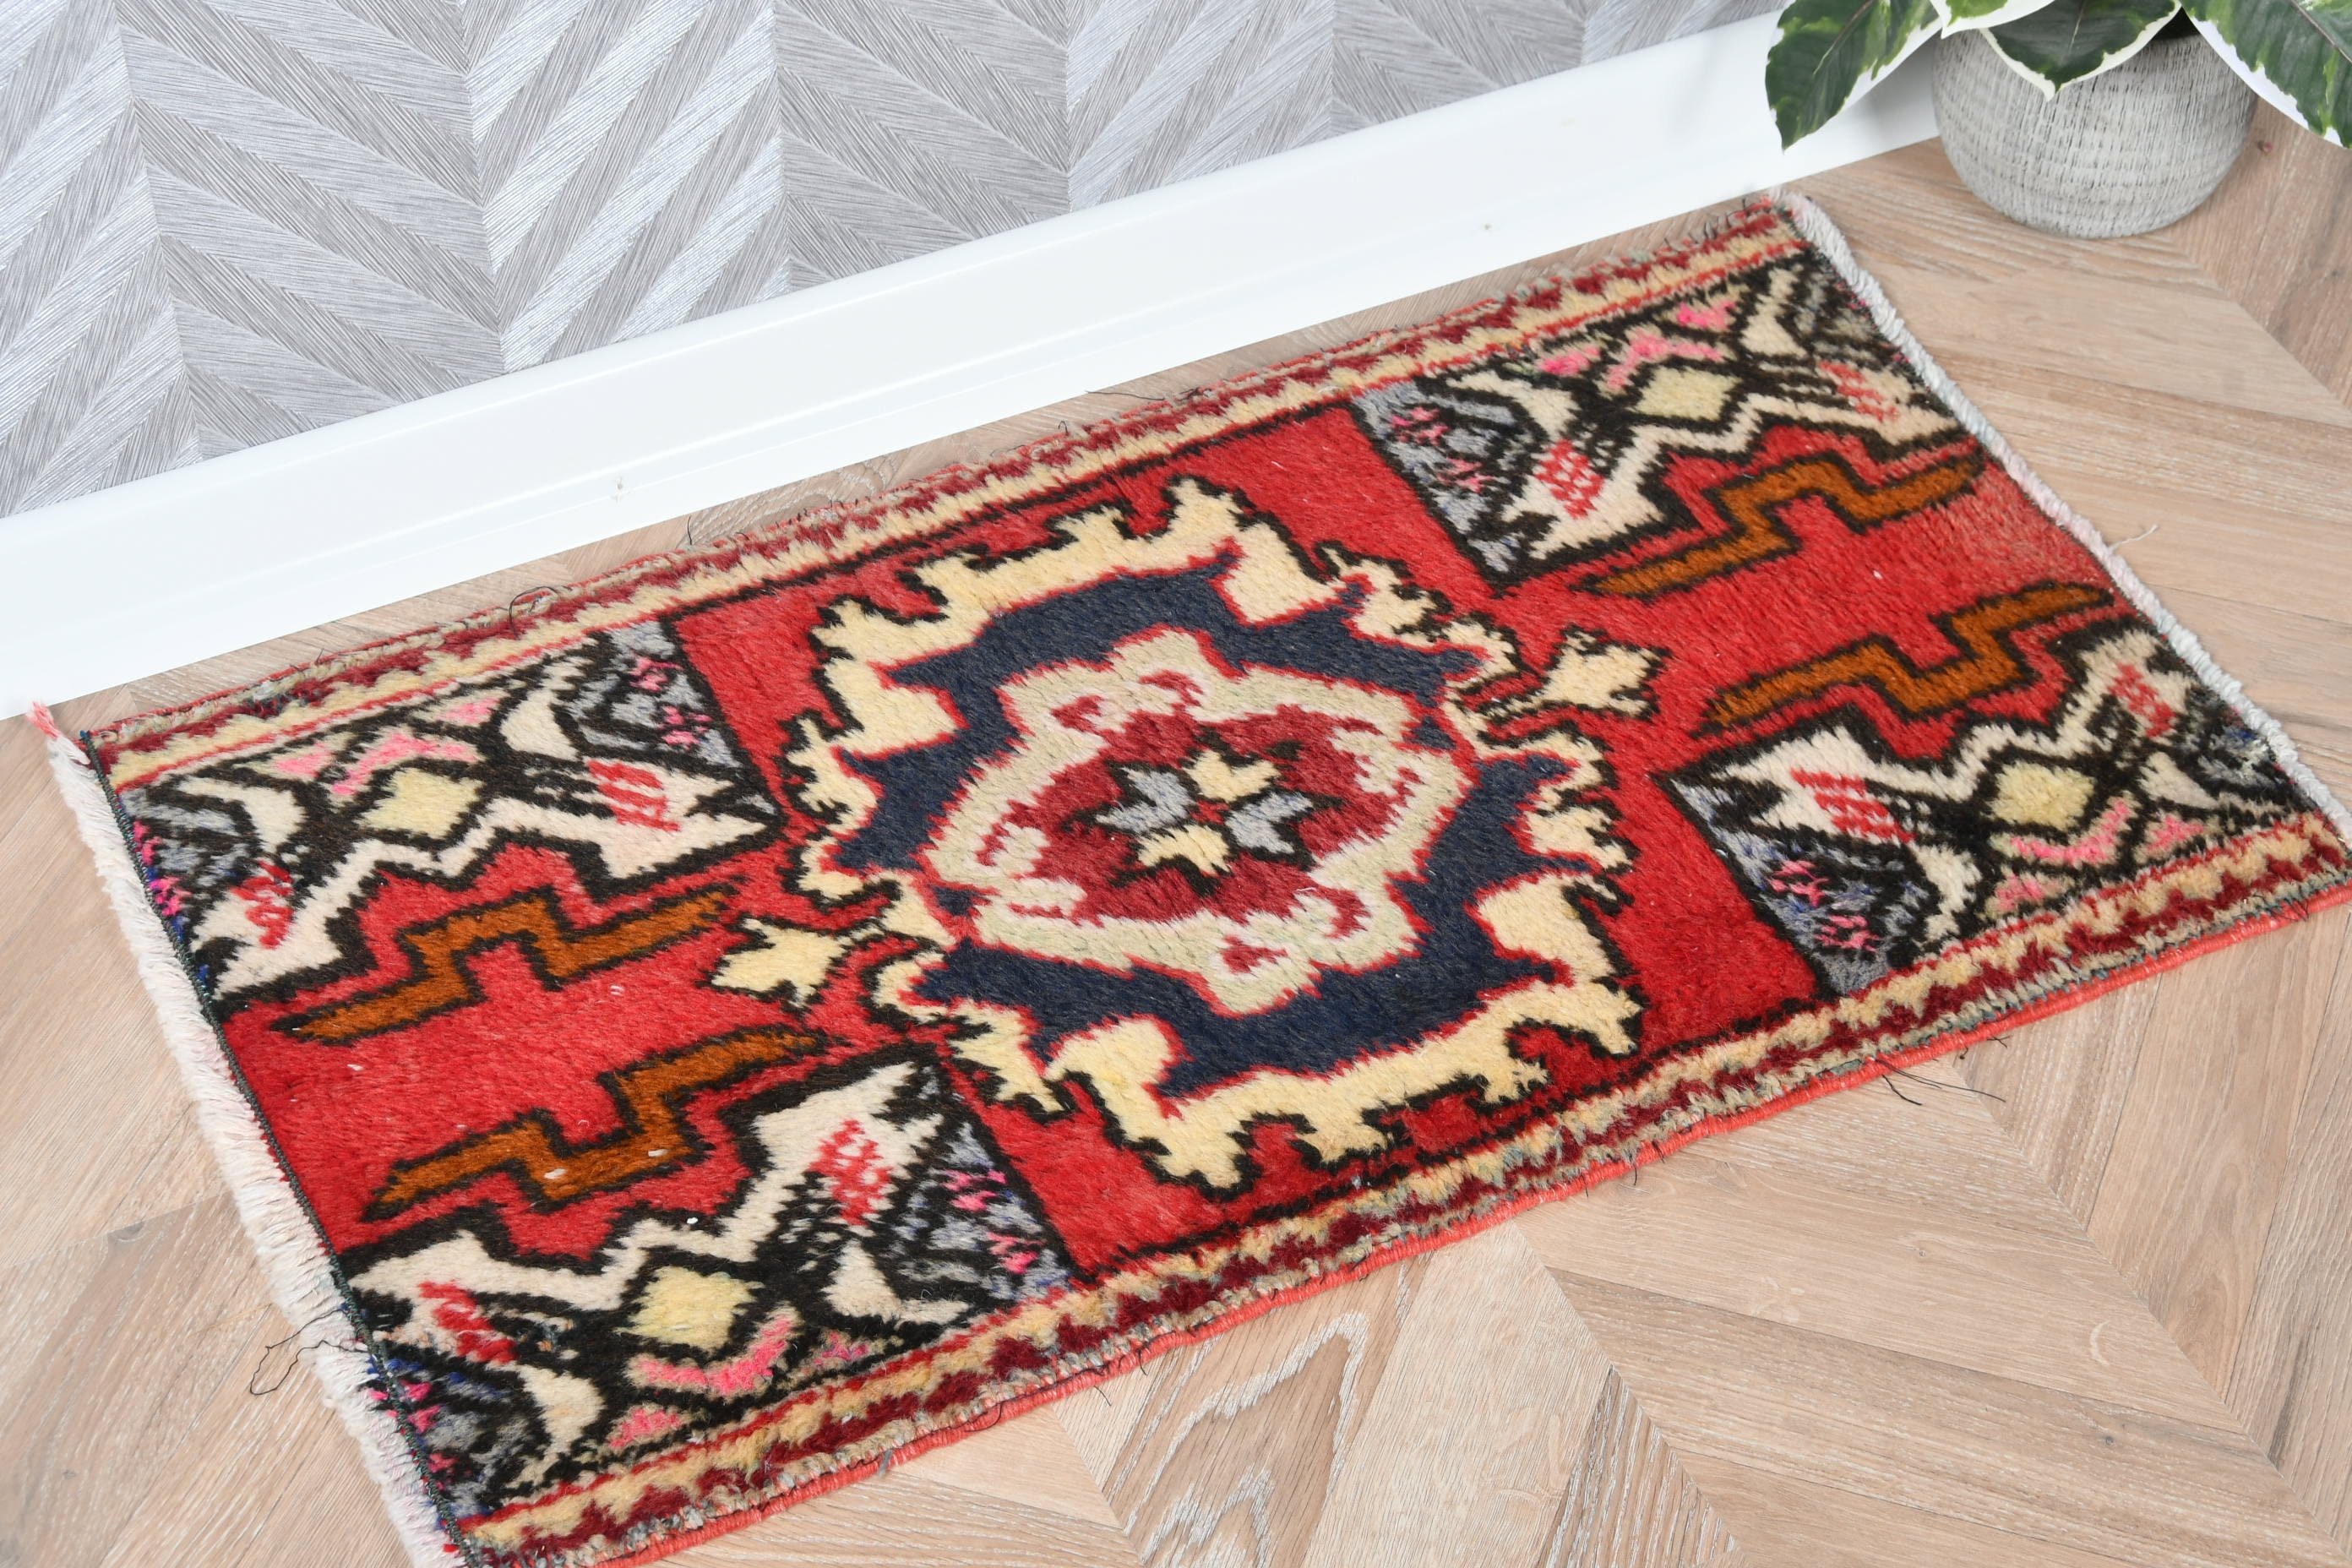 Red Antique Rug, Rugs for Bedroom, Turkish Rug, Vintage Rugs, Kitchen Rugs, Car Mat Rugs, Antique Rug, 1.5x2.7 ft Small Rugs, Floor Rugs